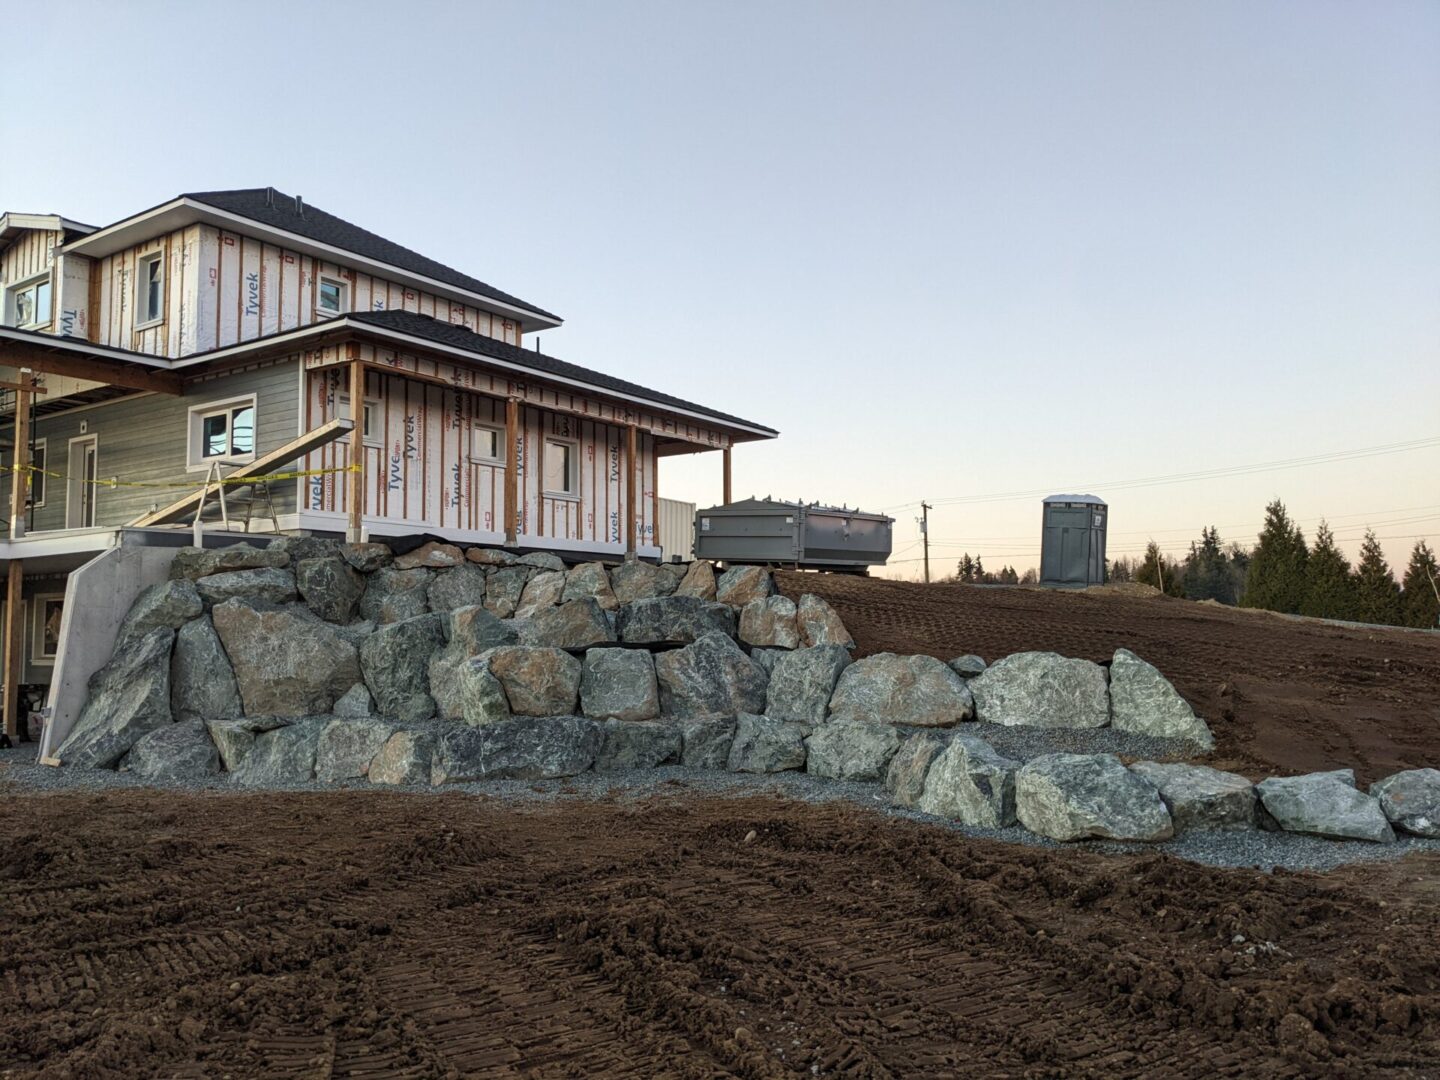 A new house with exposed insulation under construction, featuring a stone retaining wall in the foreground and a portable toilet on the side.